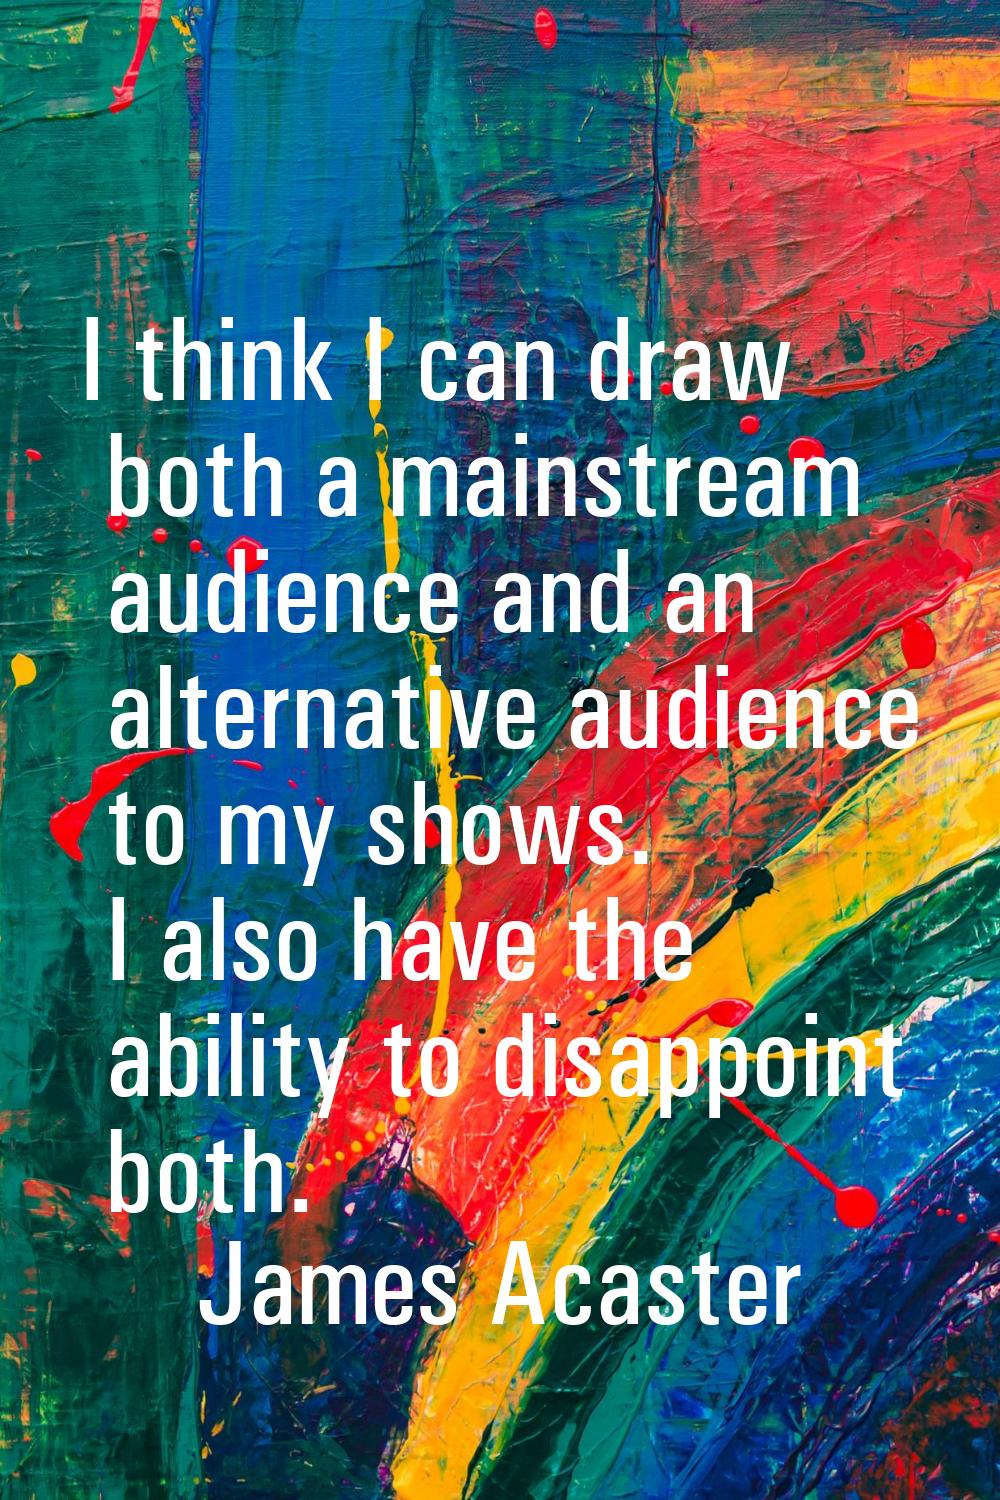 I think I can draw both a mainstream audience and an alternative audience to my shows. I also have 